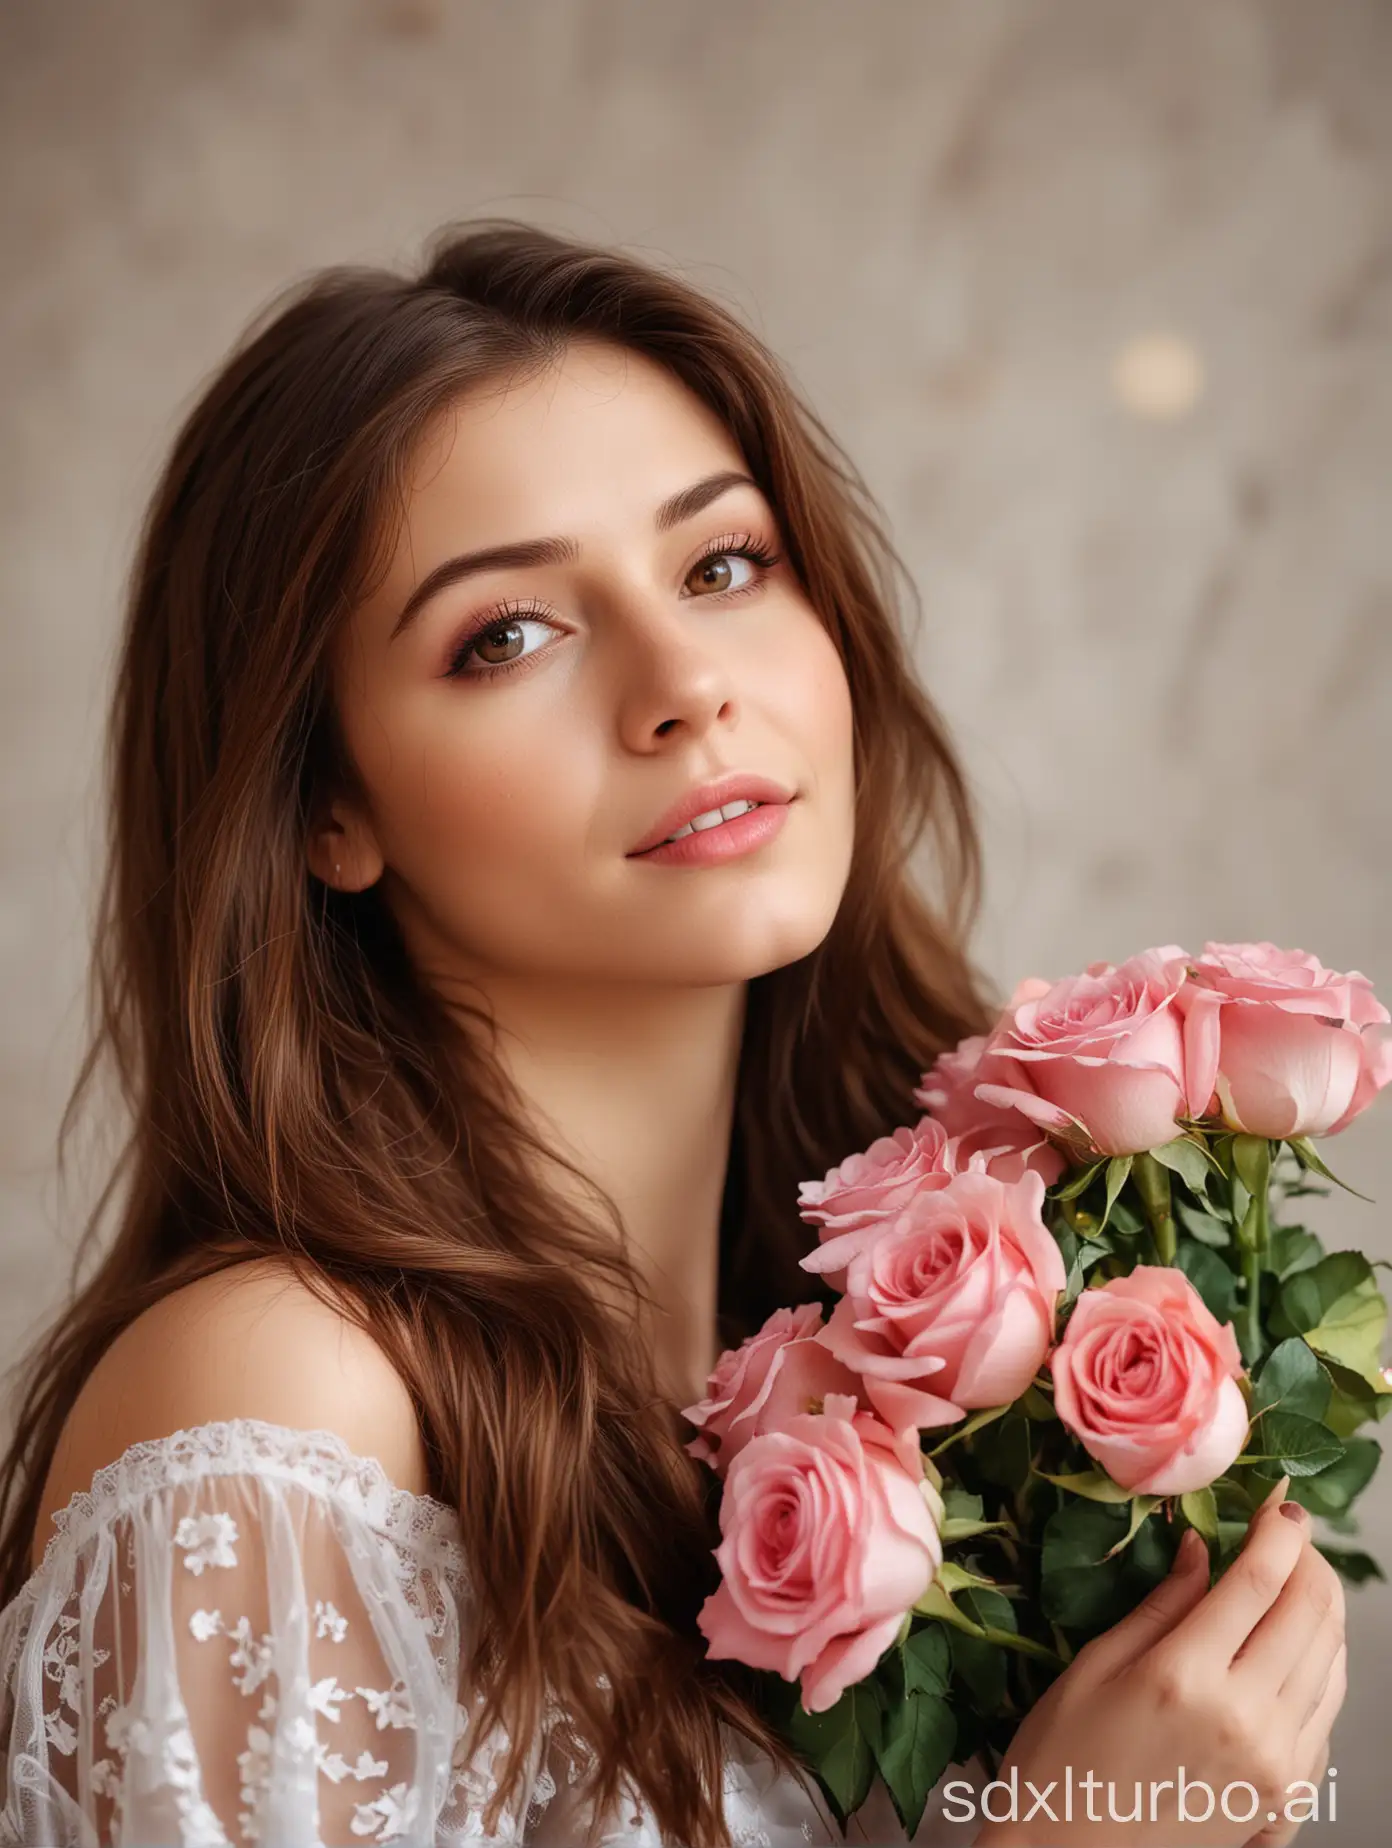 Woman-Holding-Bouquet-of-Roses-with-Dreamy-Bokeh-Background